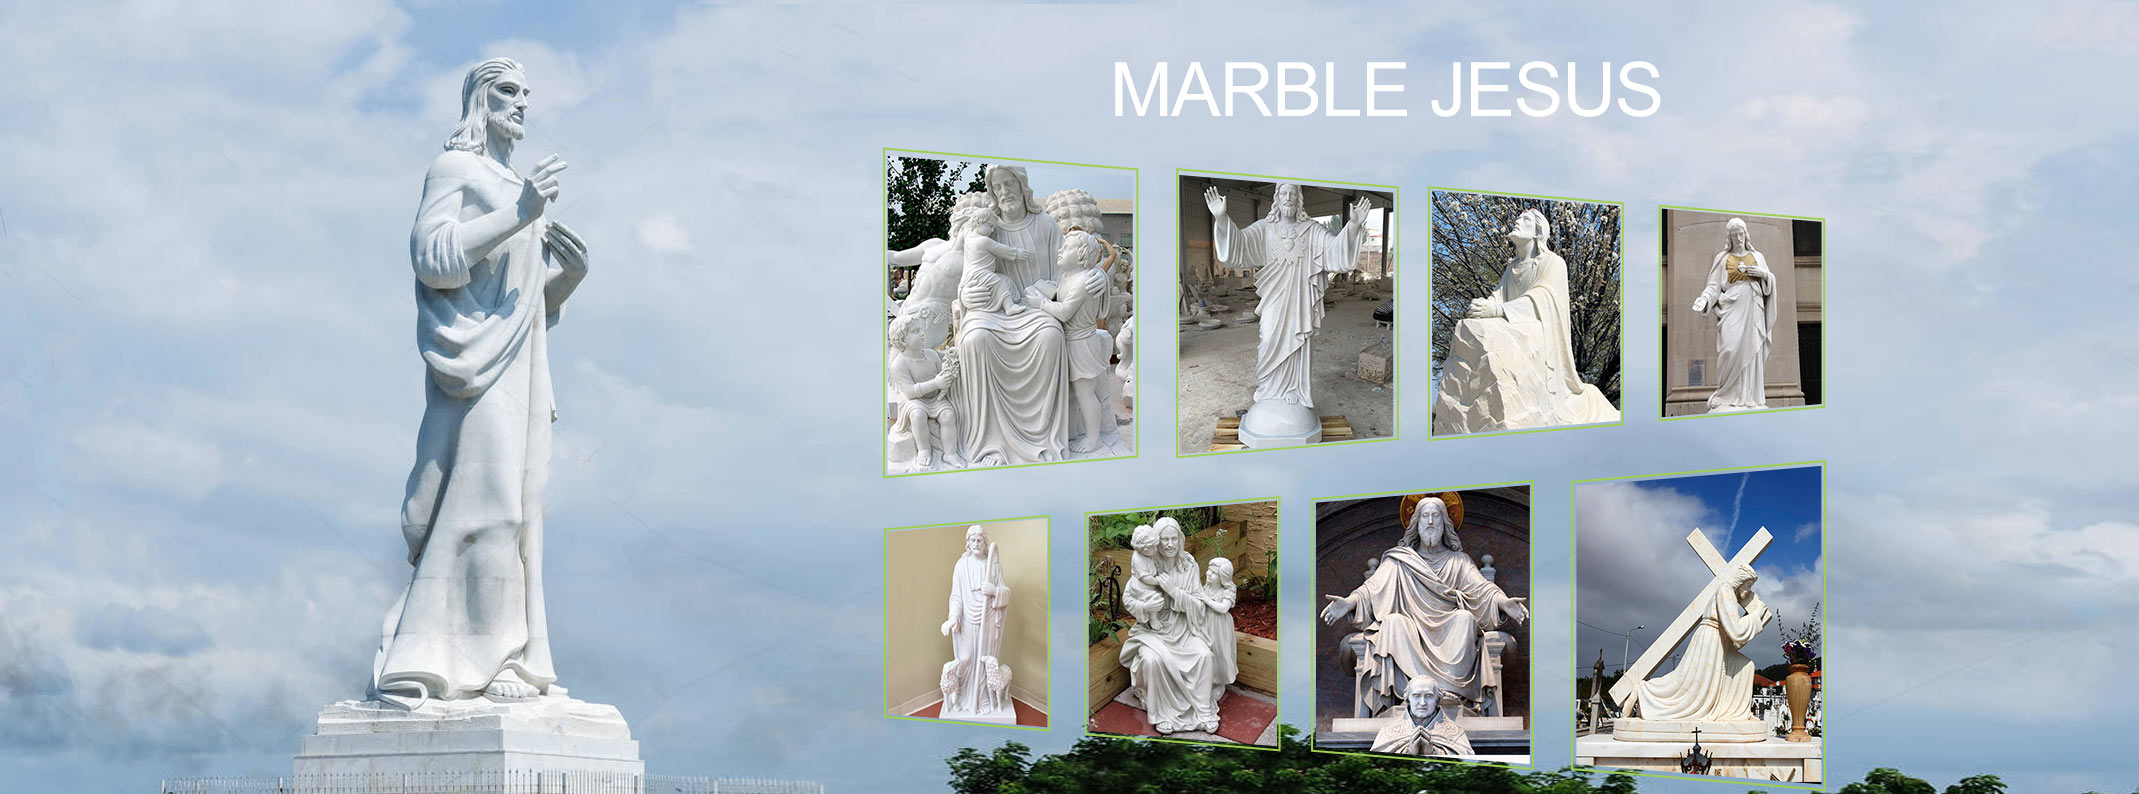 carving marble jesus statue